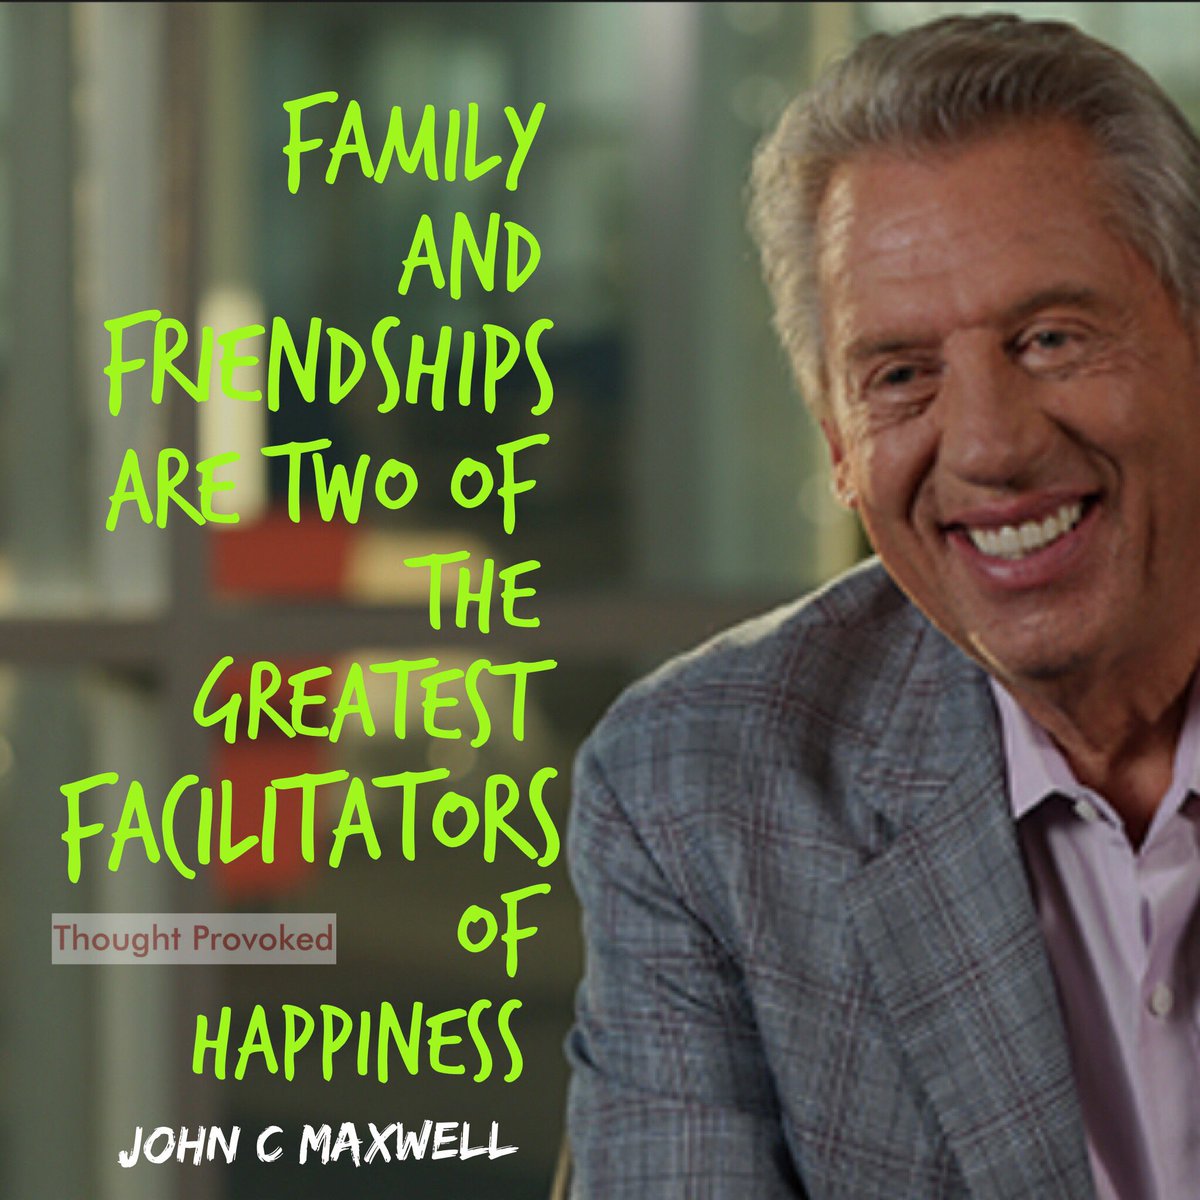 Family and friendships are two of the greatest facilitators of happiness. #quote #IQRTG